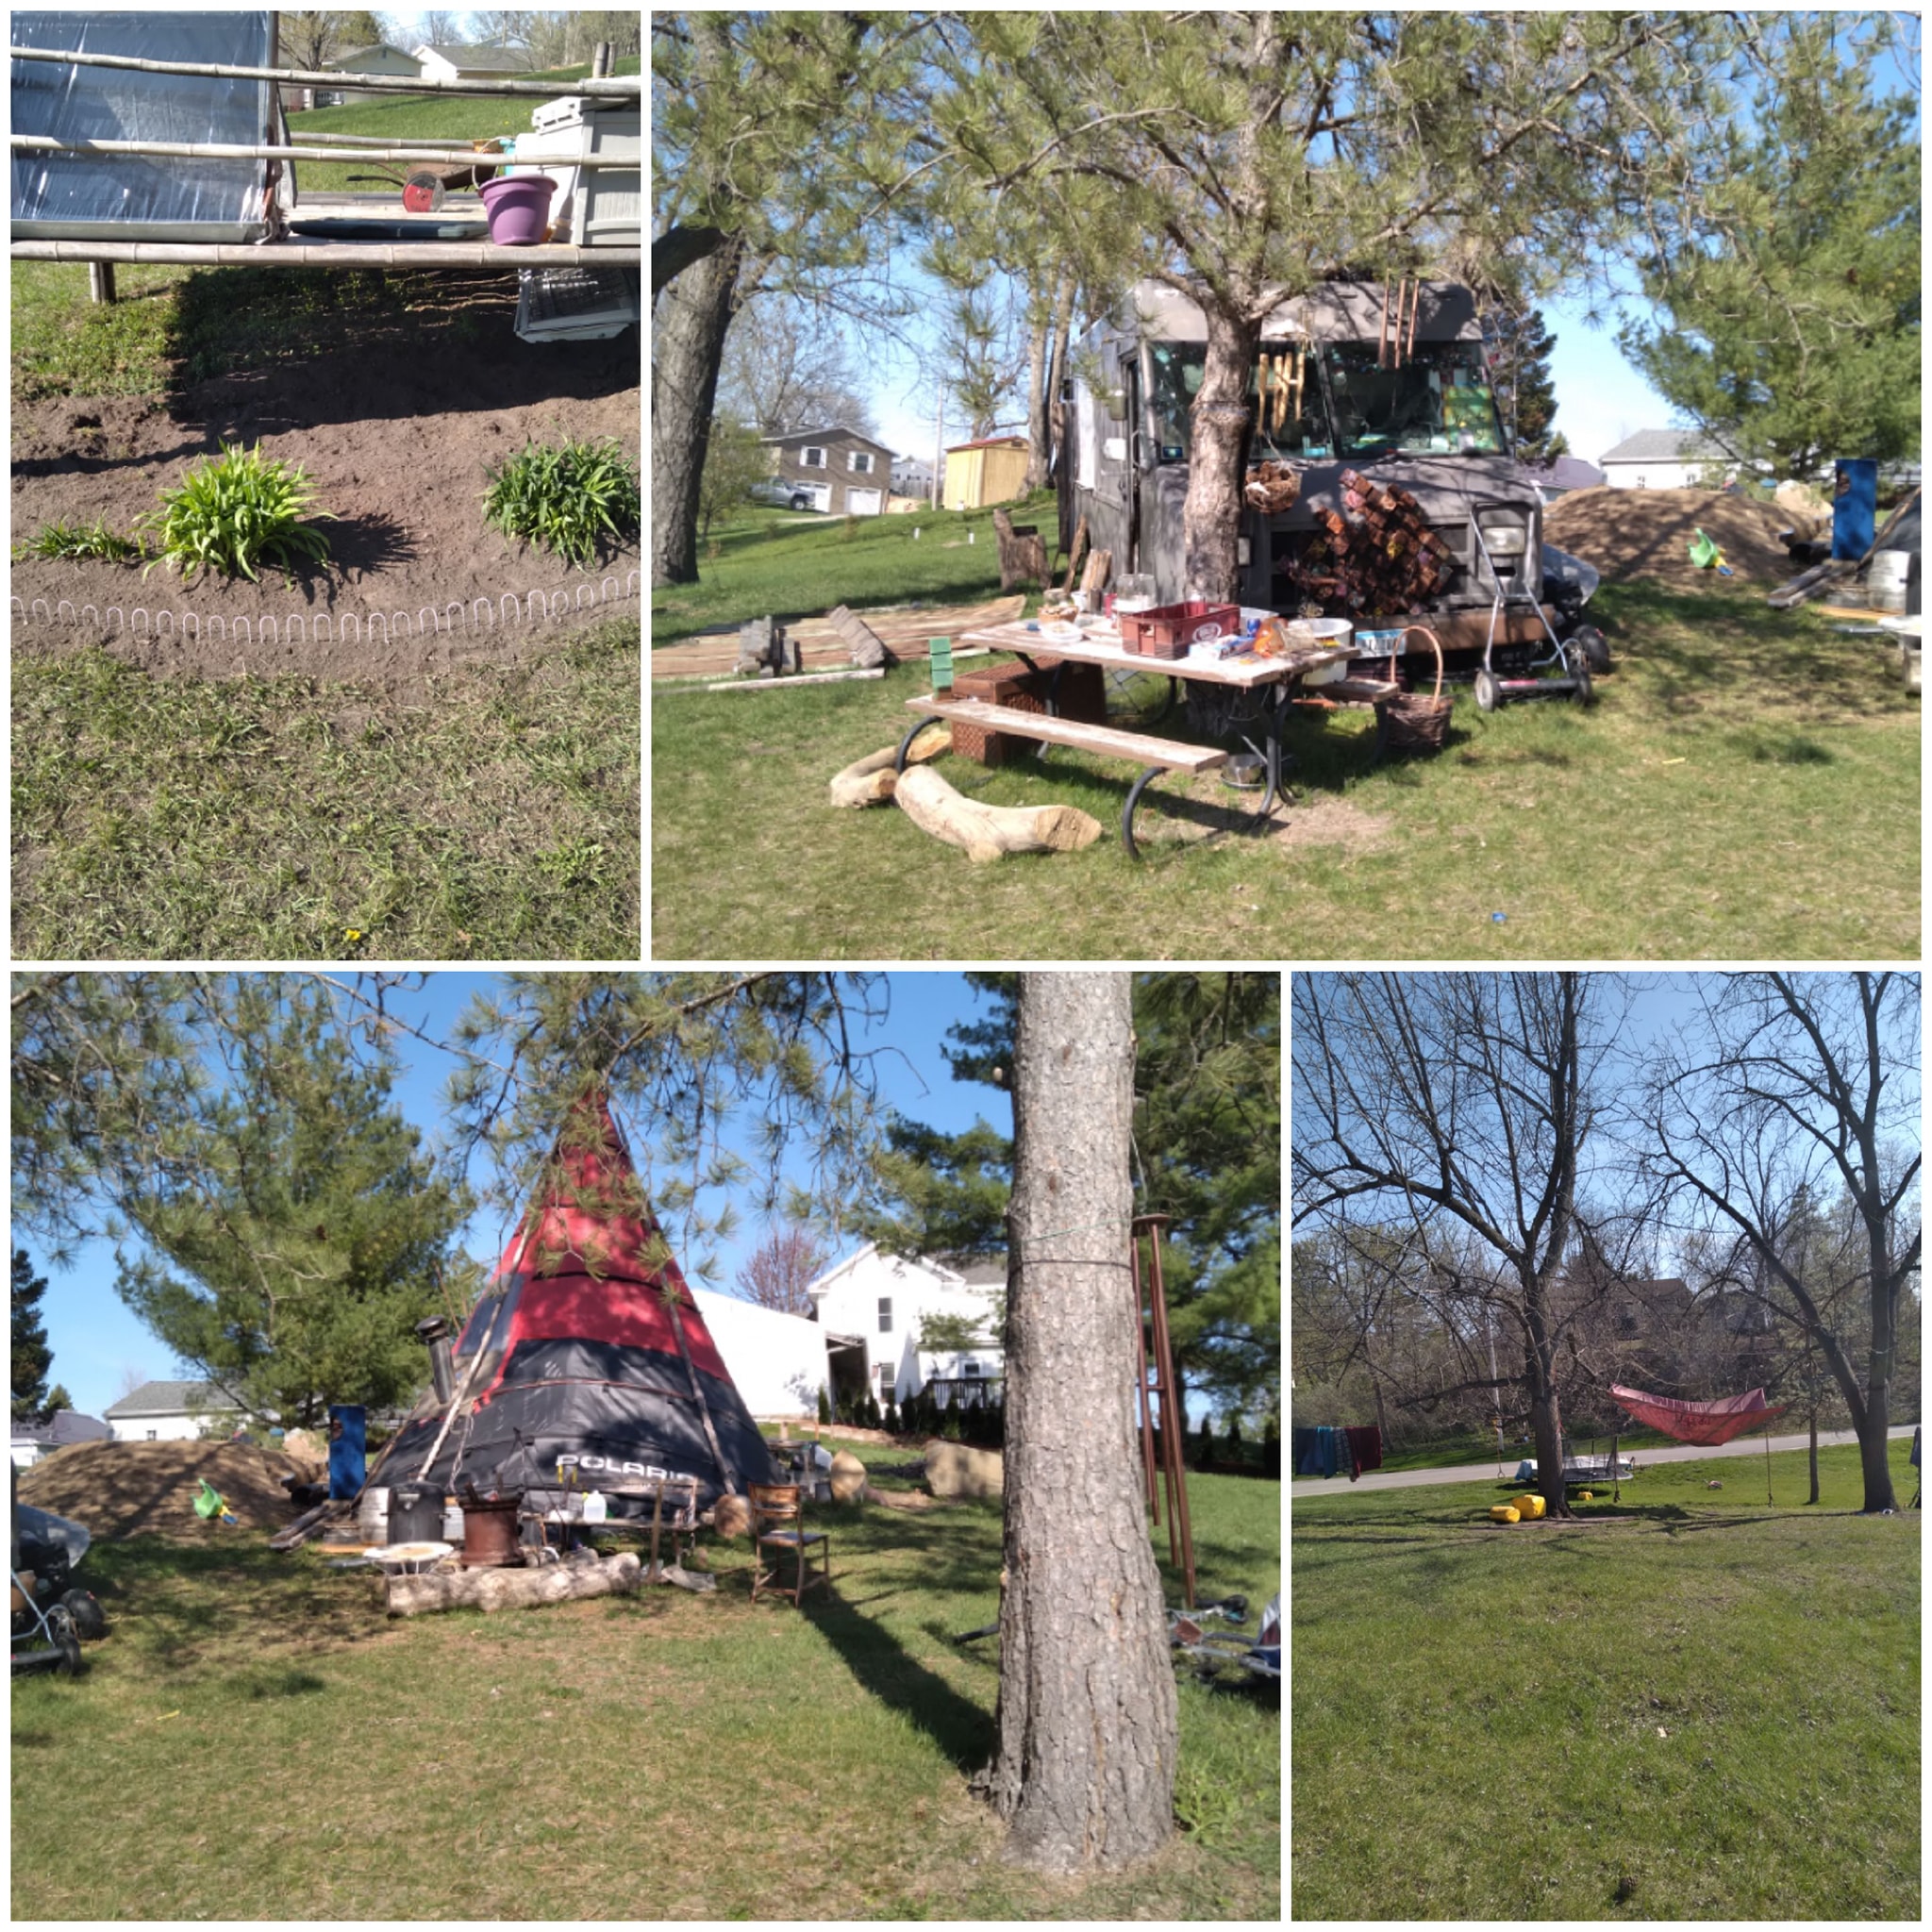 a photo collage of Jim's lot before the "abatement" showing our tipi, the panel van full of our belongings, the garden, and the play equipment for Jim's kids.